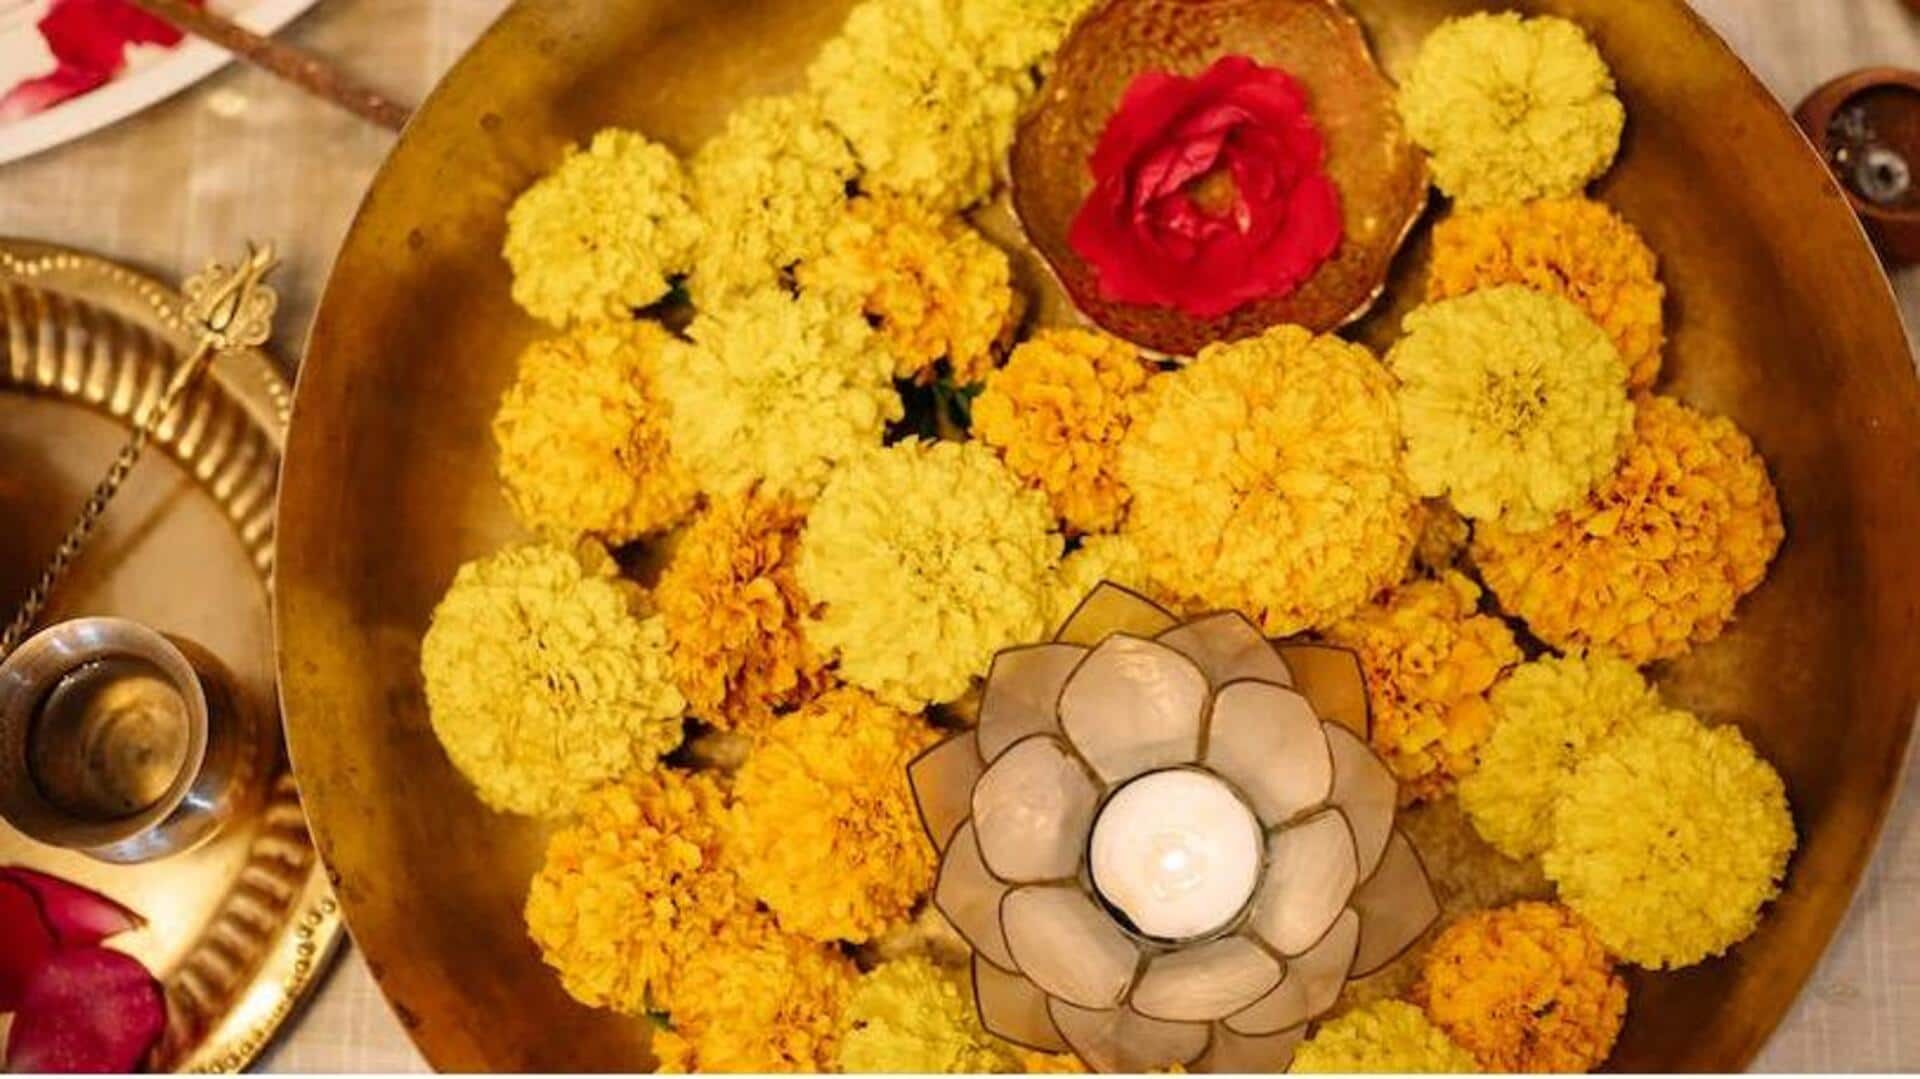 Away from family this Diwali? Try these budget-friendly decor options